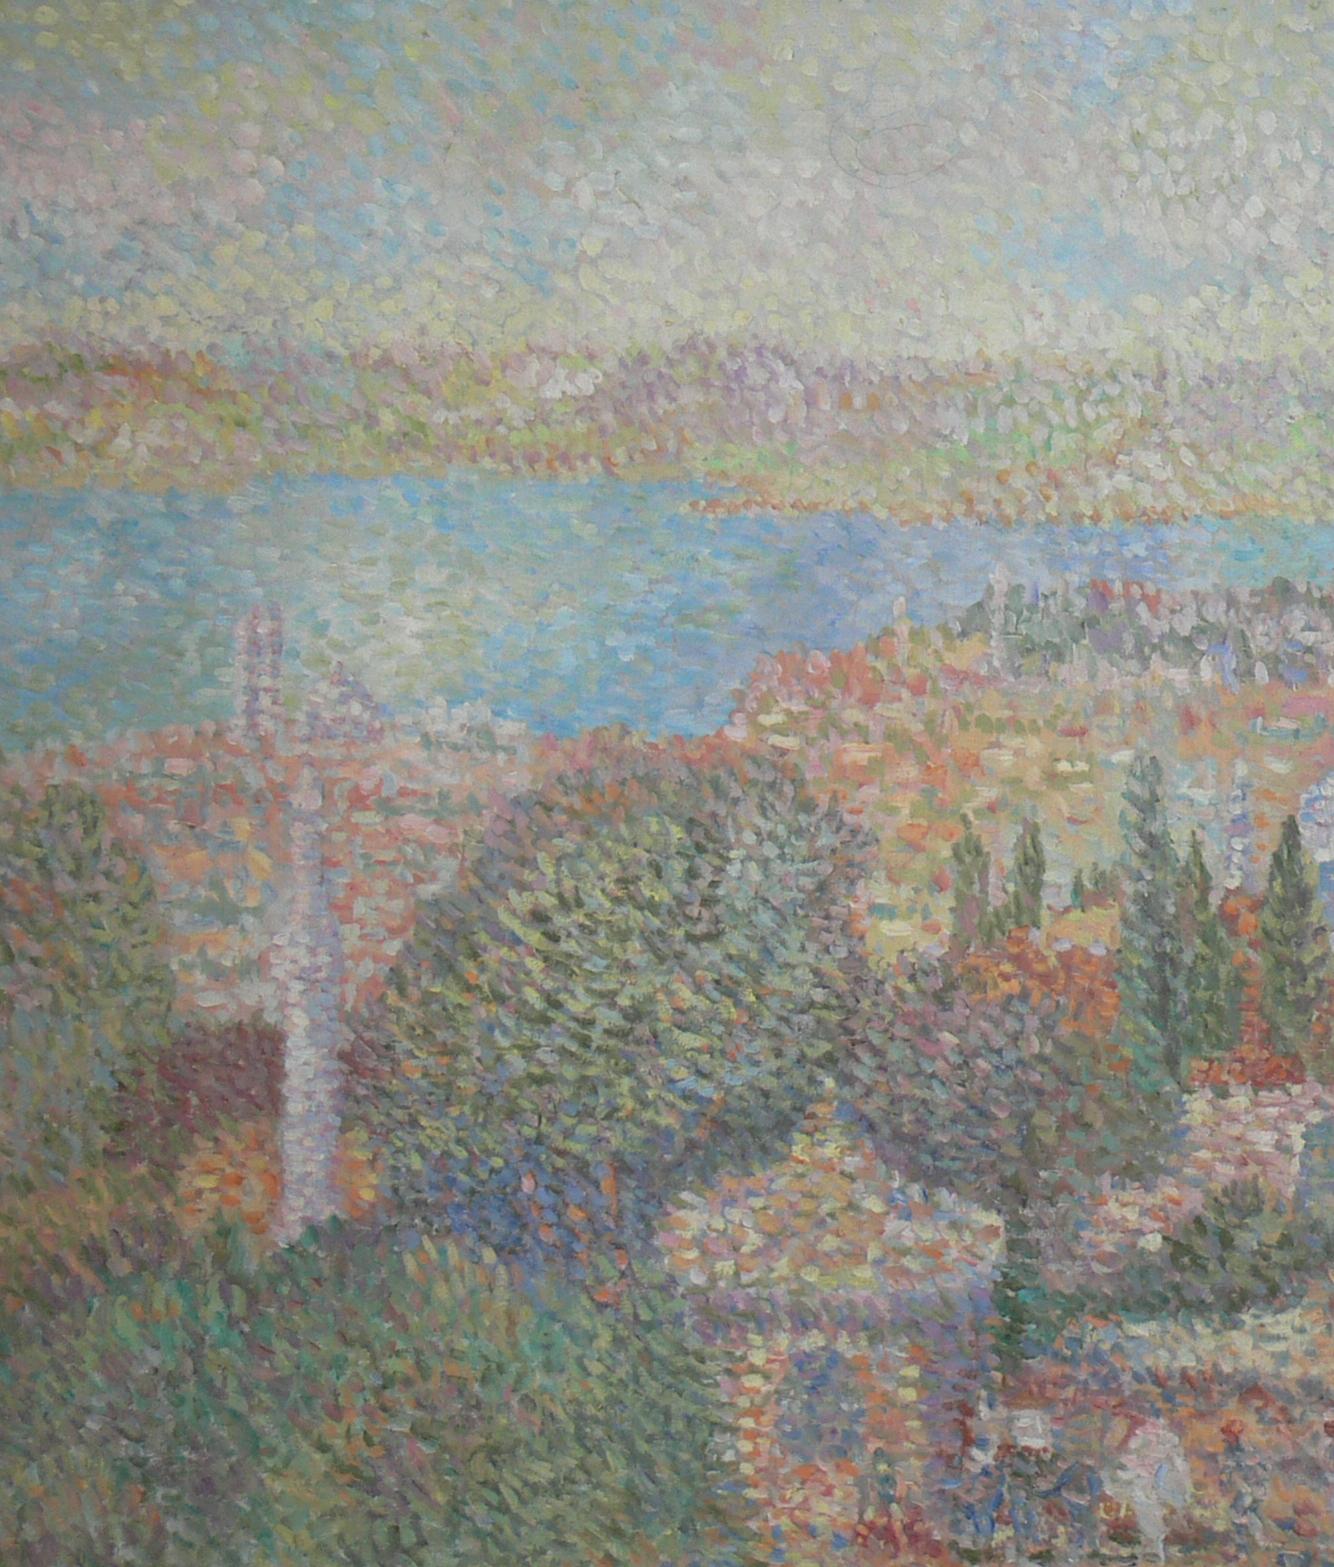 Oil paint on canvas in the style of french pointilism, 1951. By Stan Reszka ( 1924 Poland - died in Paris ). Signed lower right. Framed. 
Measurements: Height: 23.62 in ( 60 cm ), Width: 47.24 in ( 120 cm )


